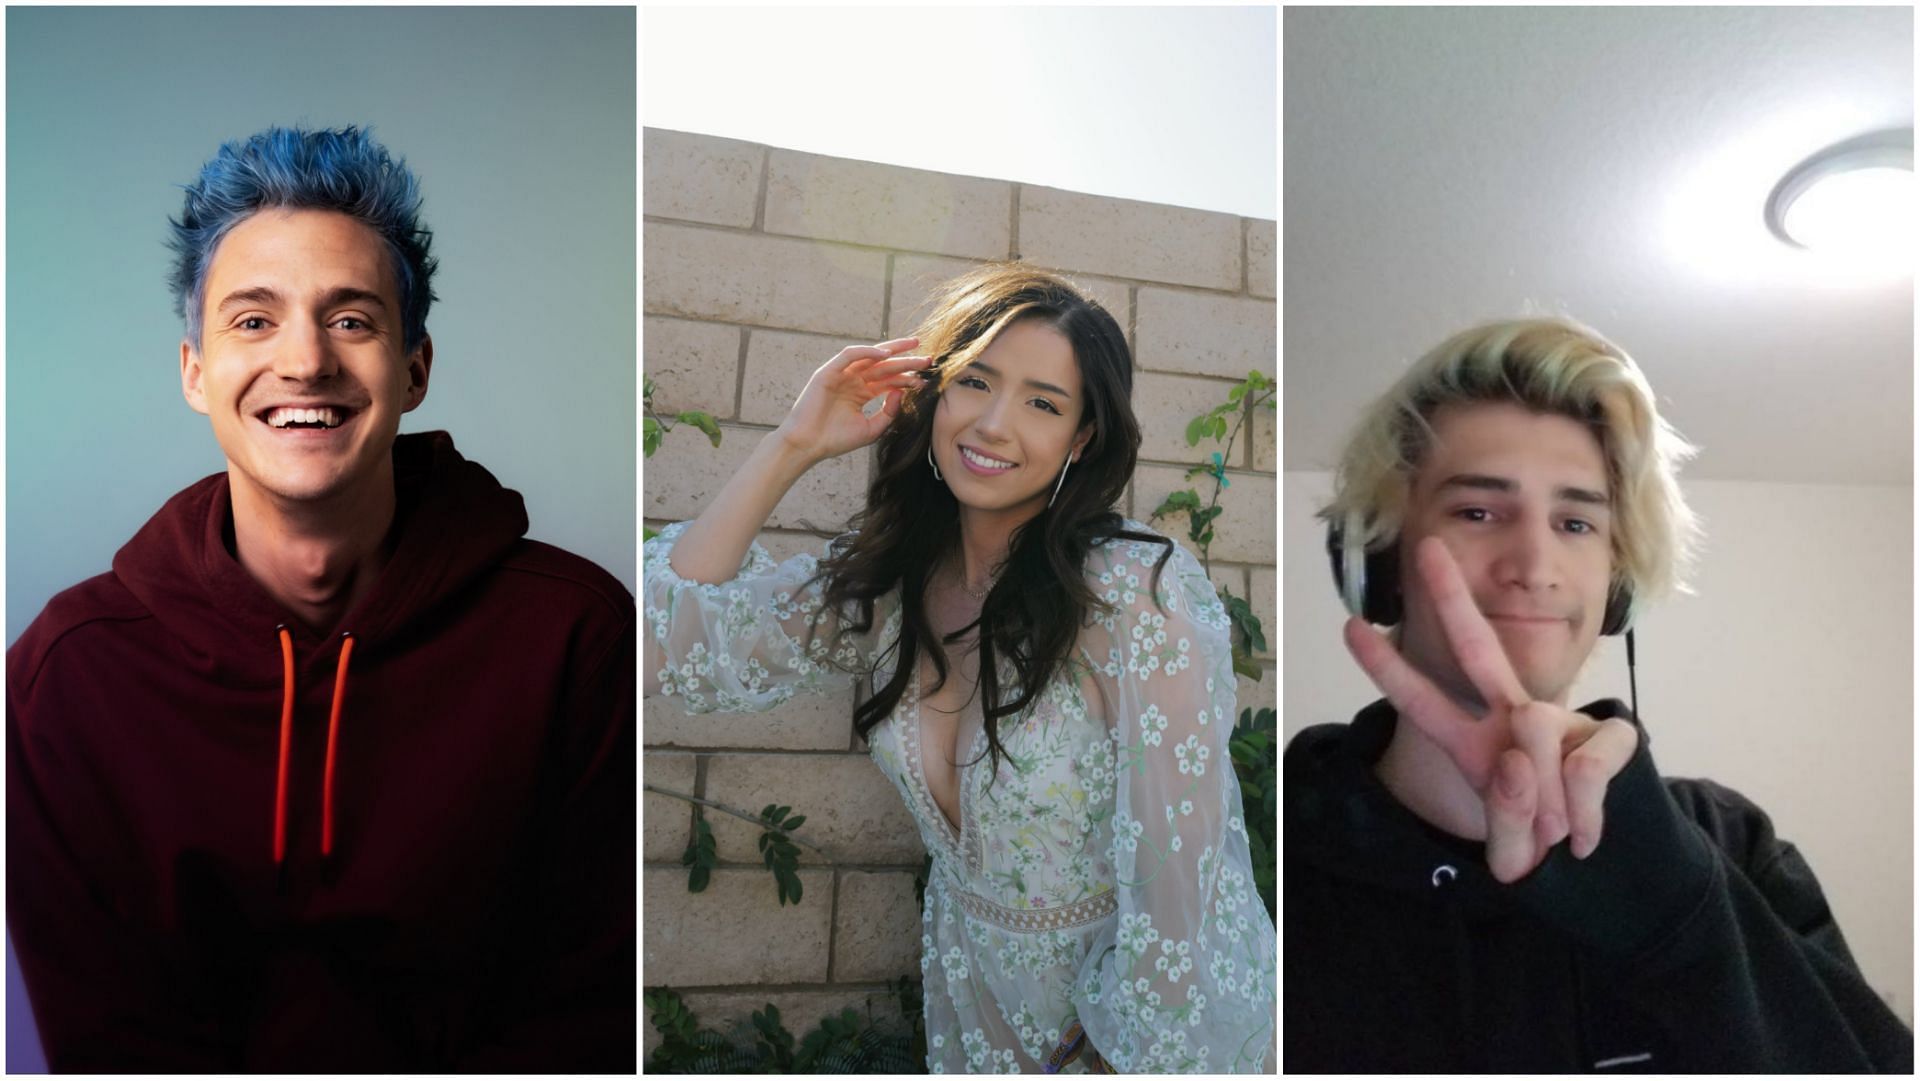 Top 25 Most Followed Famous Streamers in the World 2022】